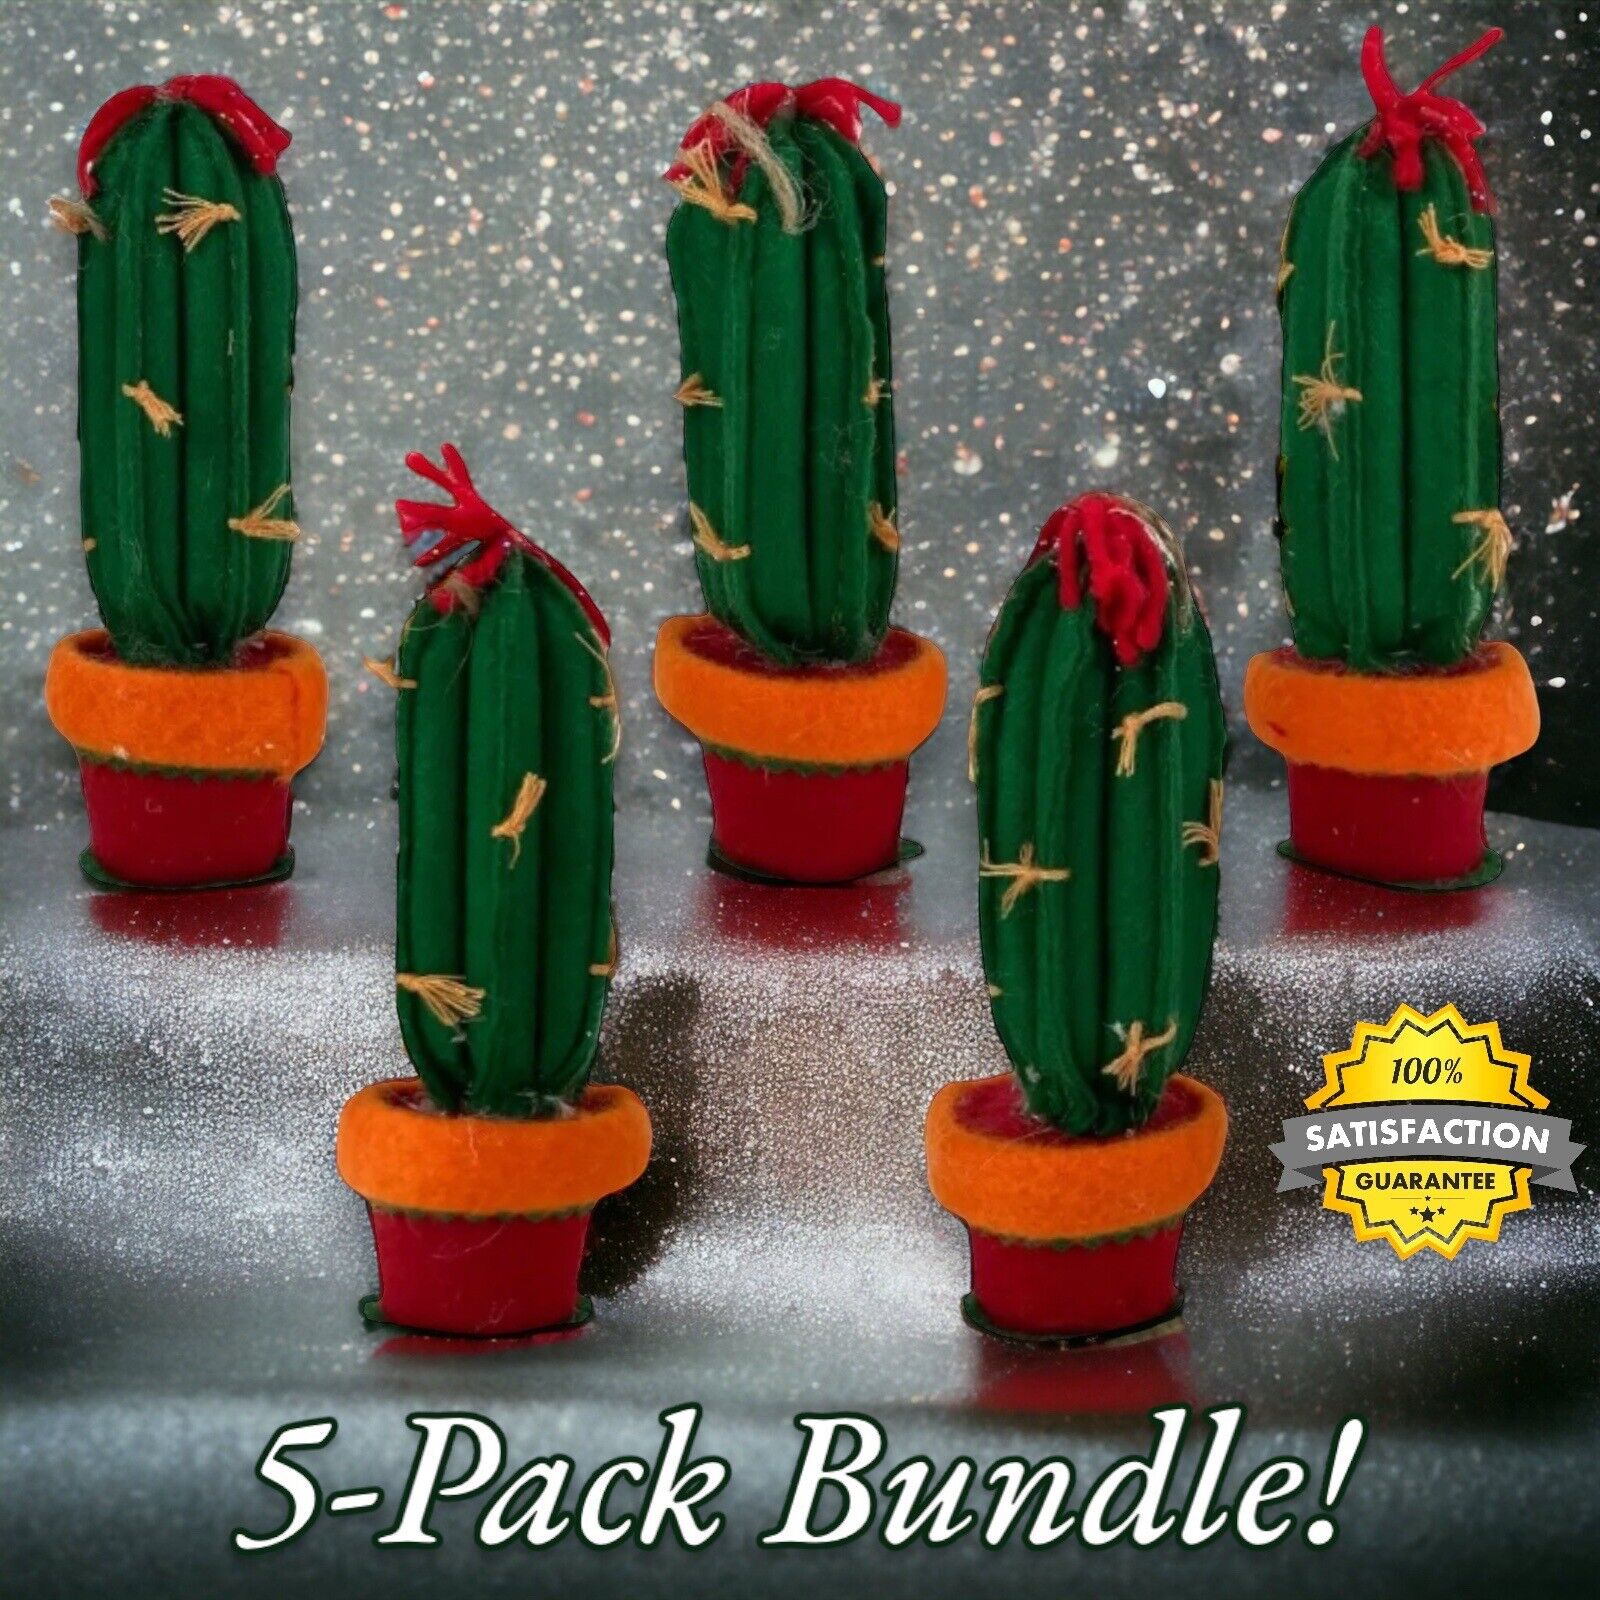 5-PACK Felt Potted Cactus Plant Christmas Holiday Ornaments 5.75 X 1.9 inches